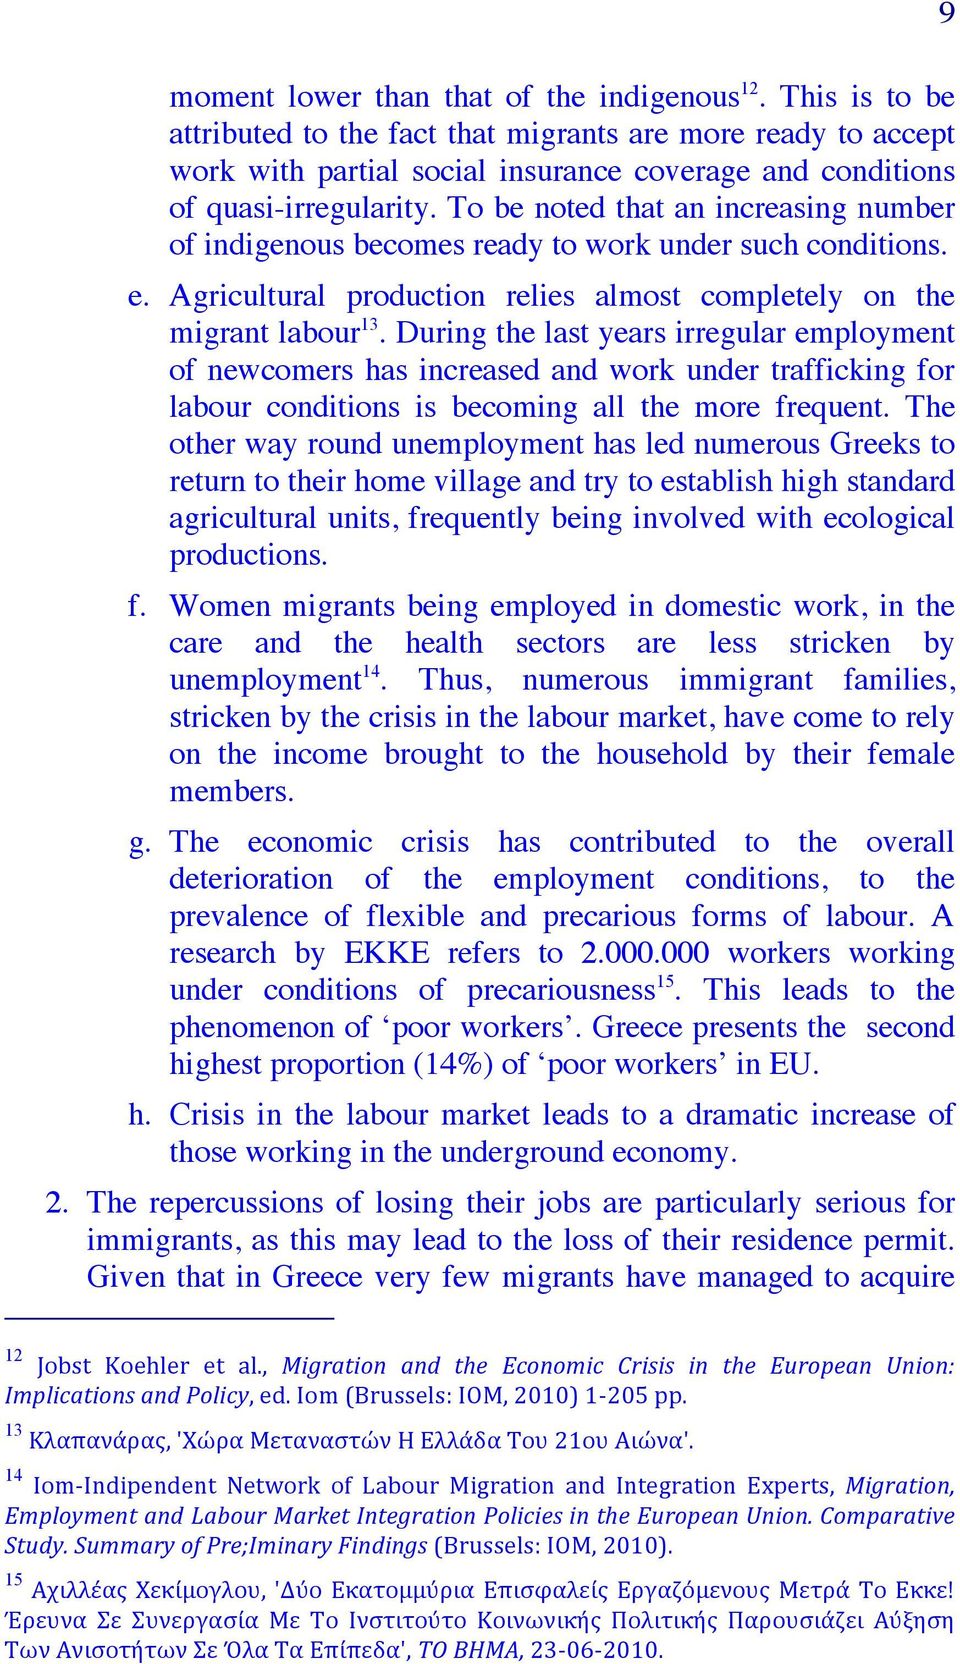 To be noted that an increasing number of indigenous becomes ready to work under such conditions. e. Agricultural production relies almost completely on the migrant labour 13.